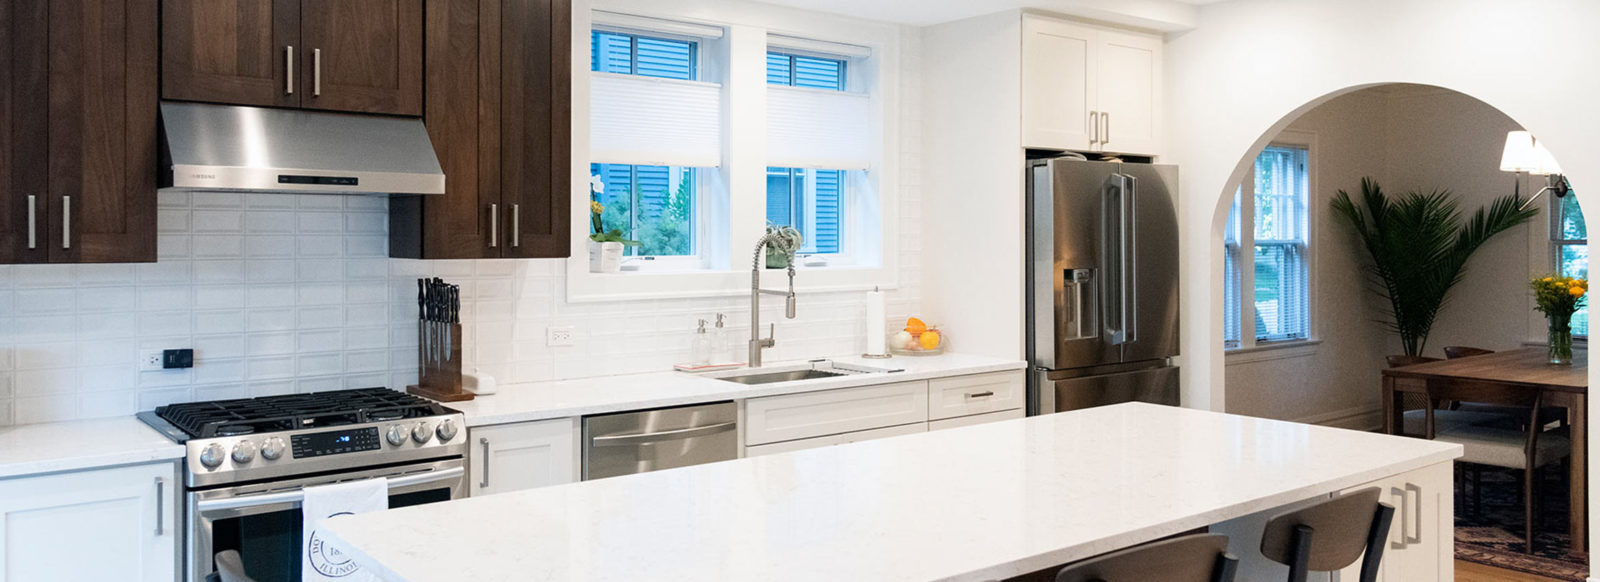 view of a recently remodeled kitchen with white and walnut cabinets